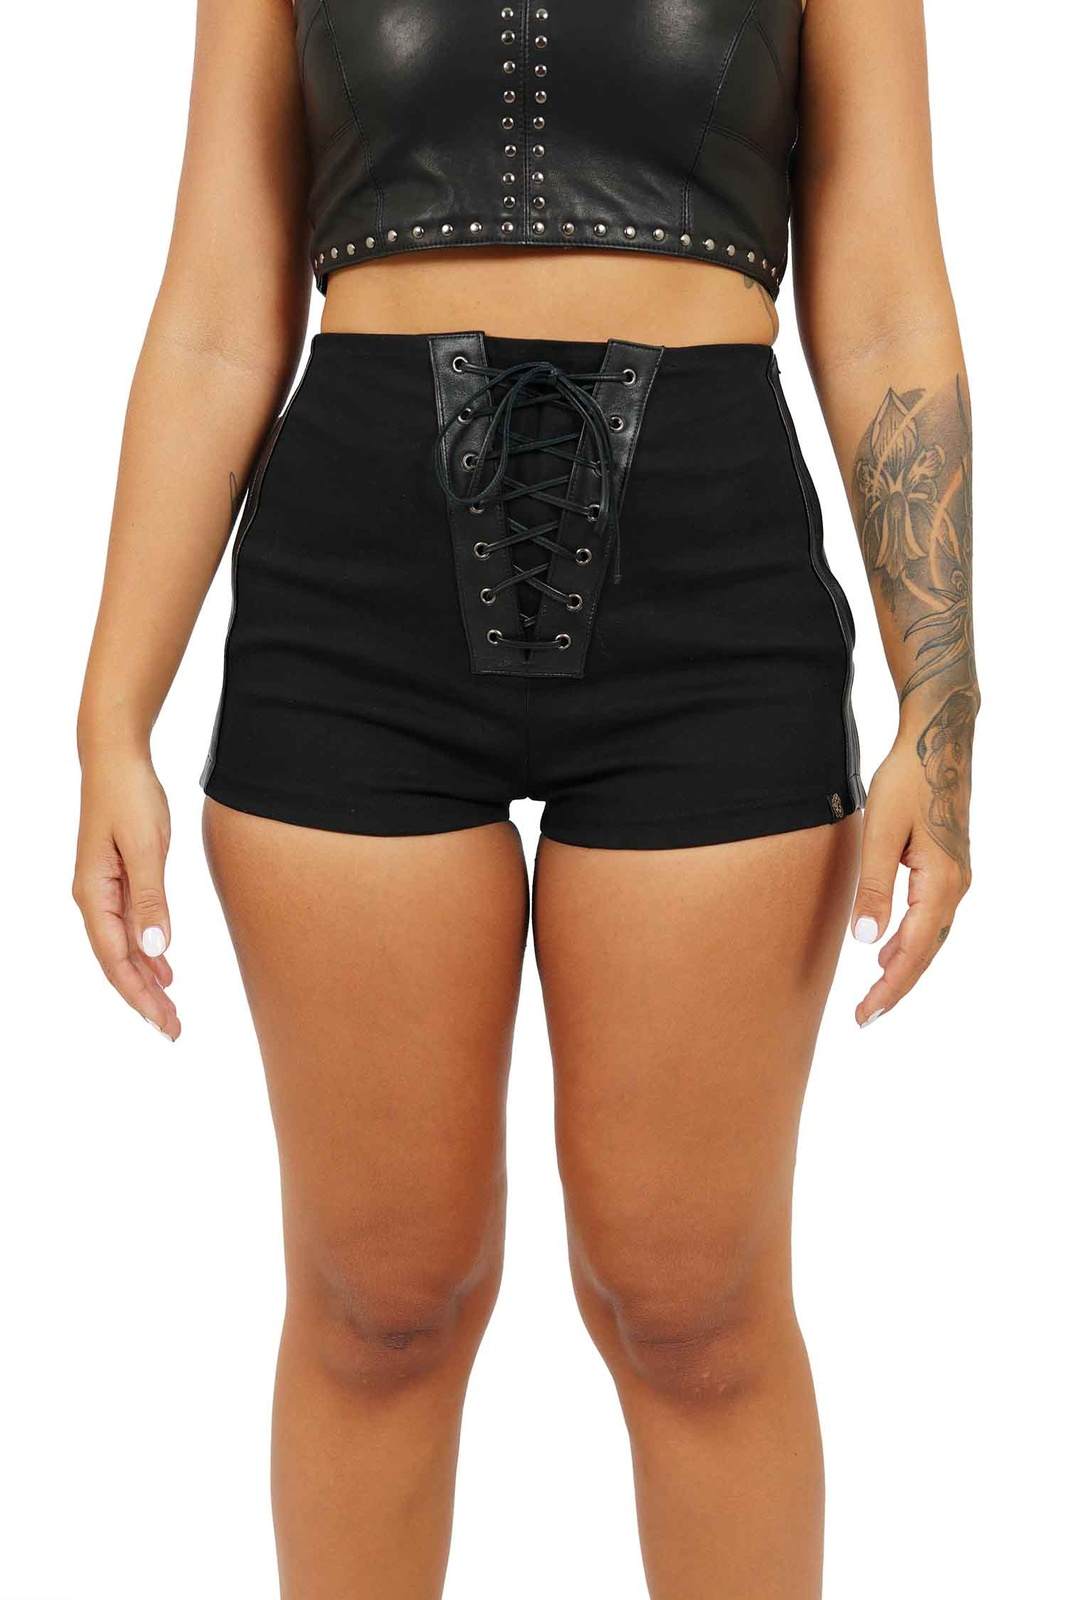 black lace up shorts from Love Khaos